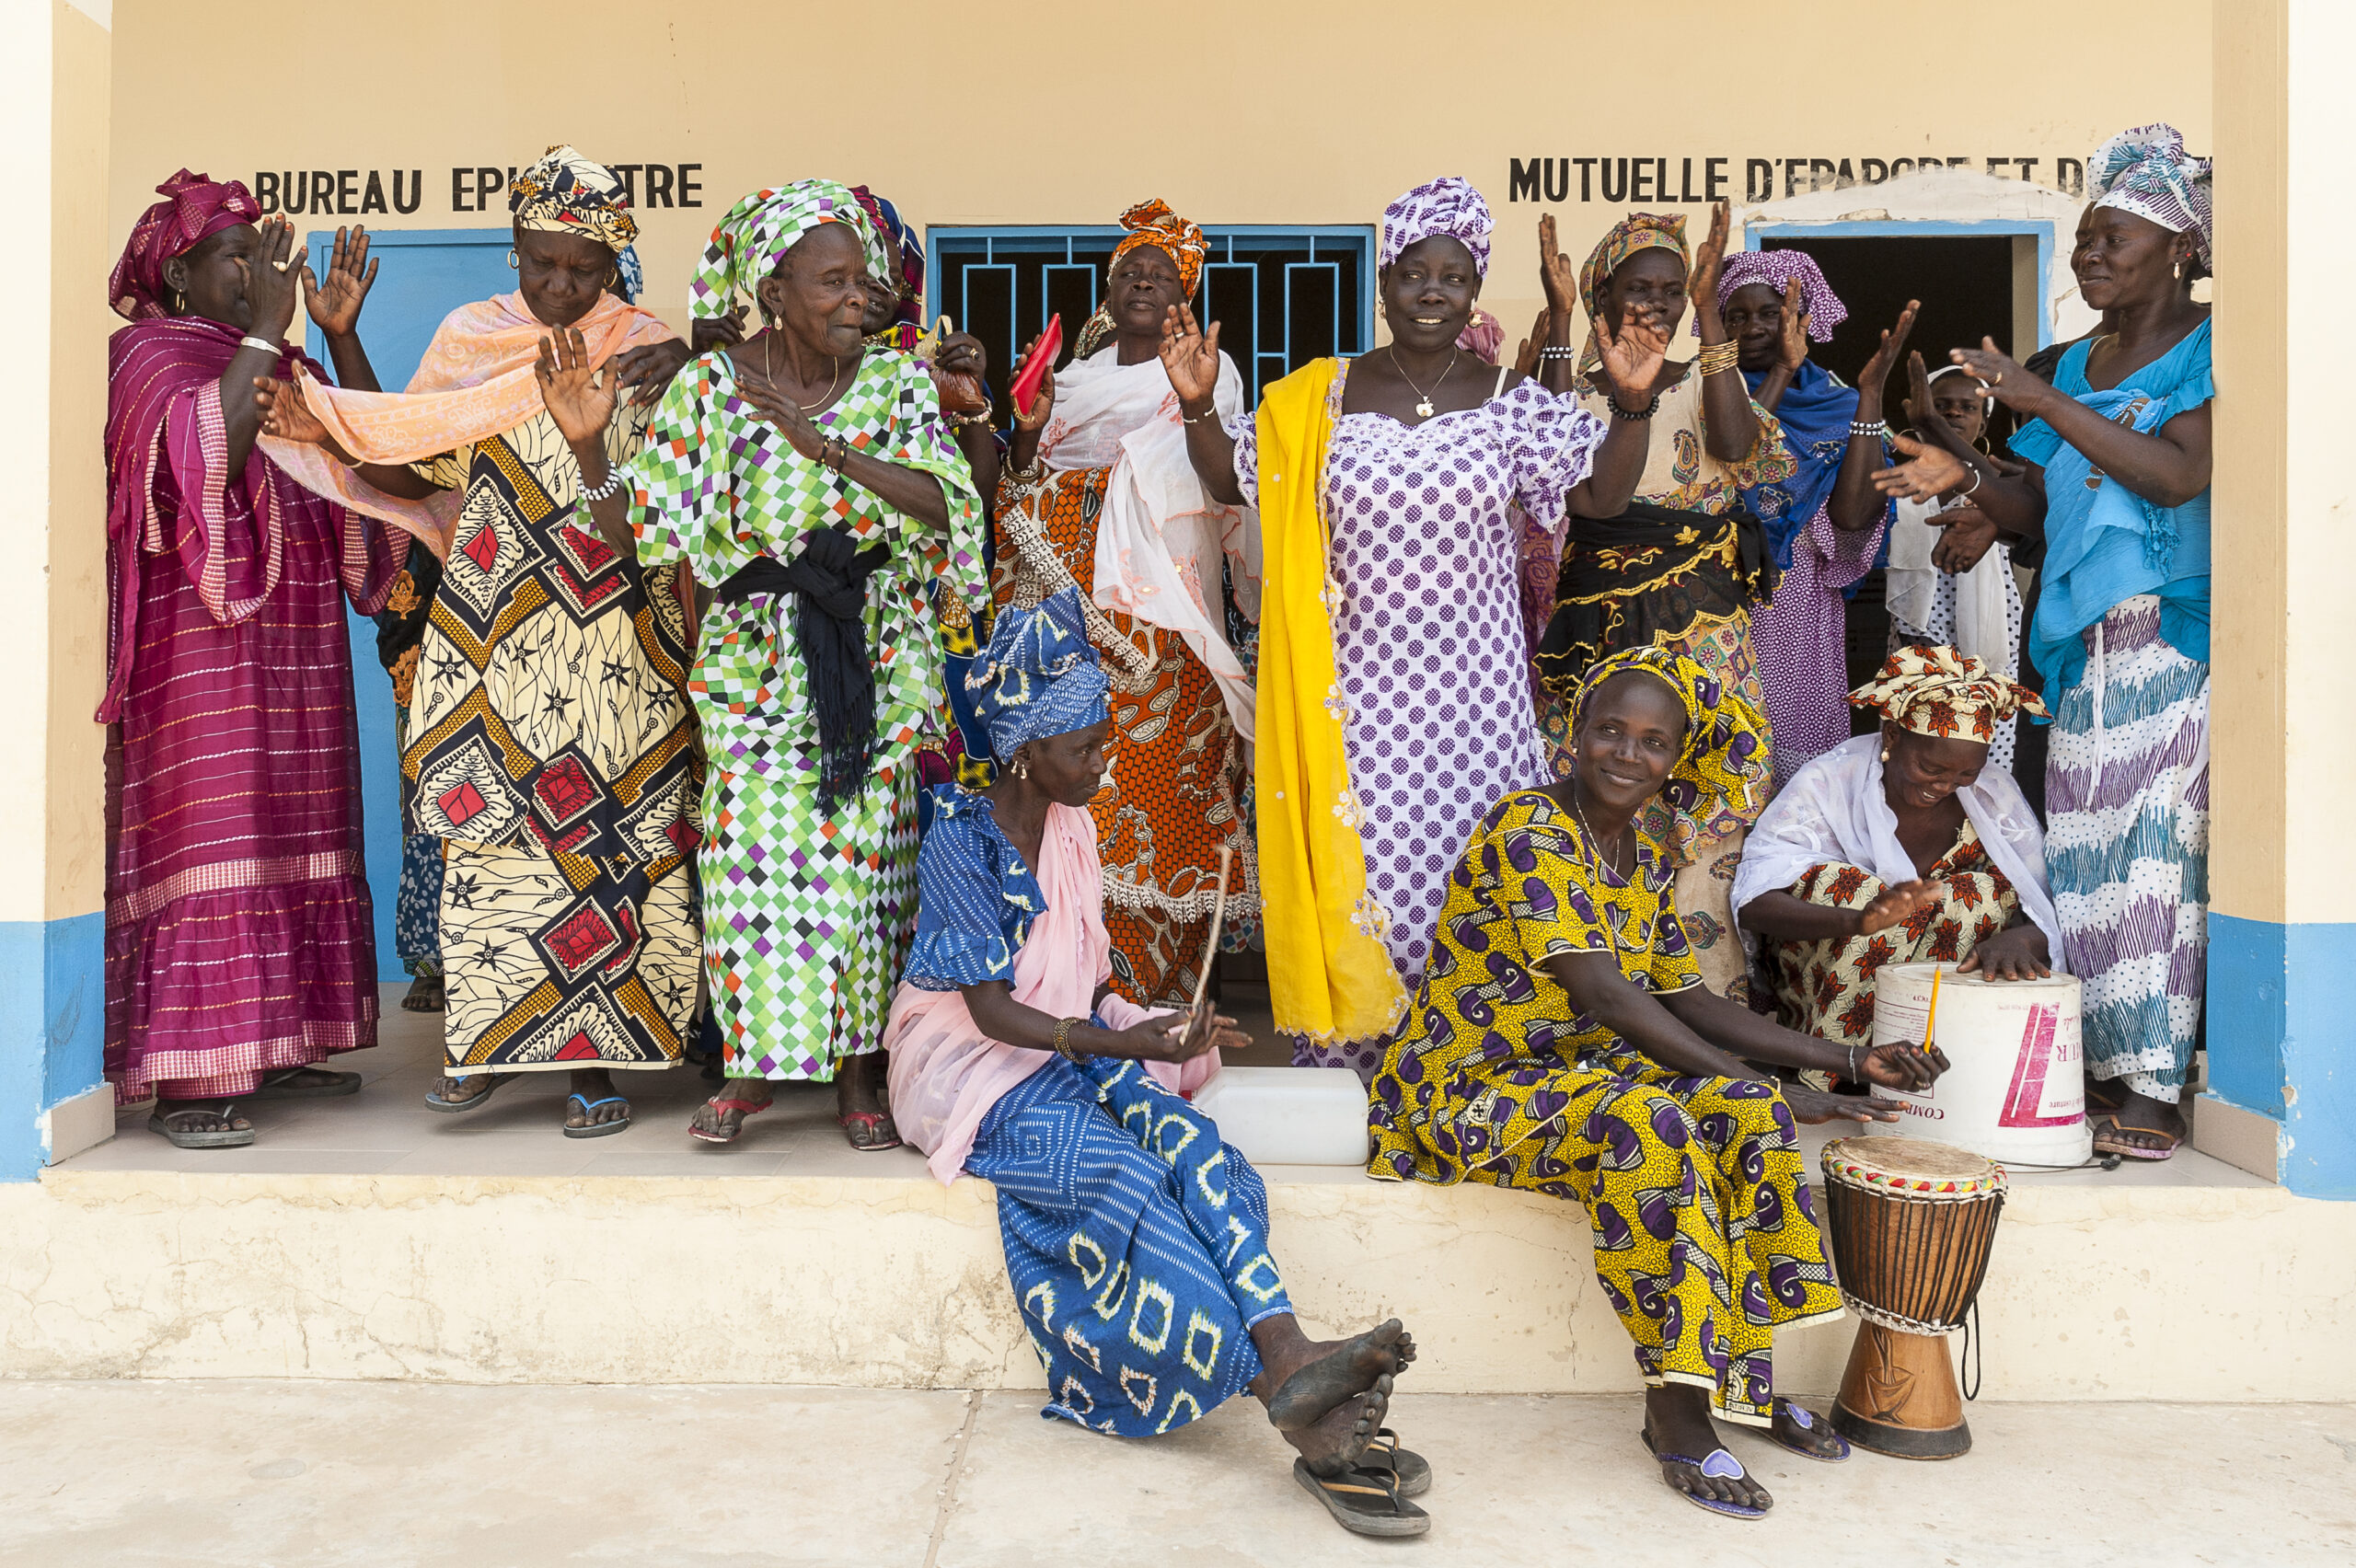 Ndereppe Epicentre in Senegal has reached self-reliance